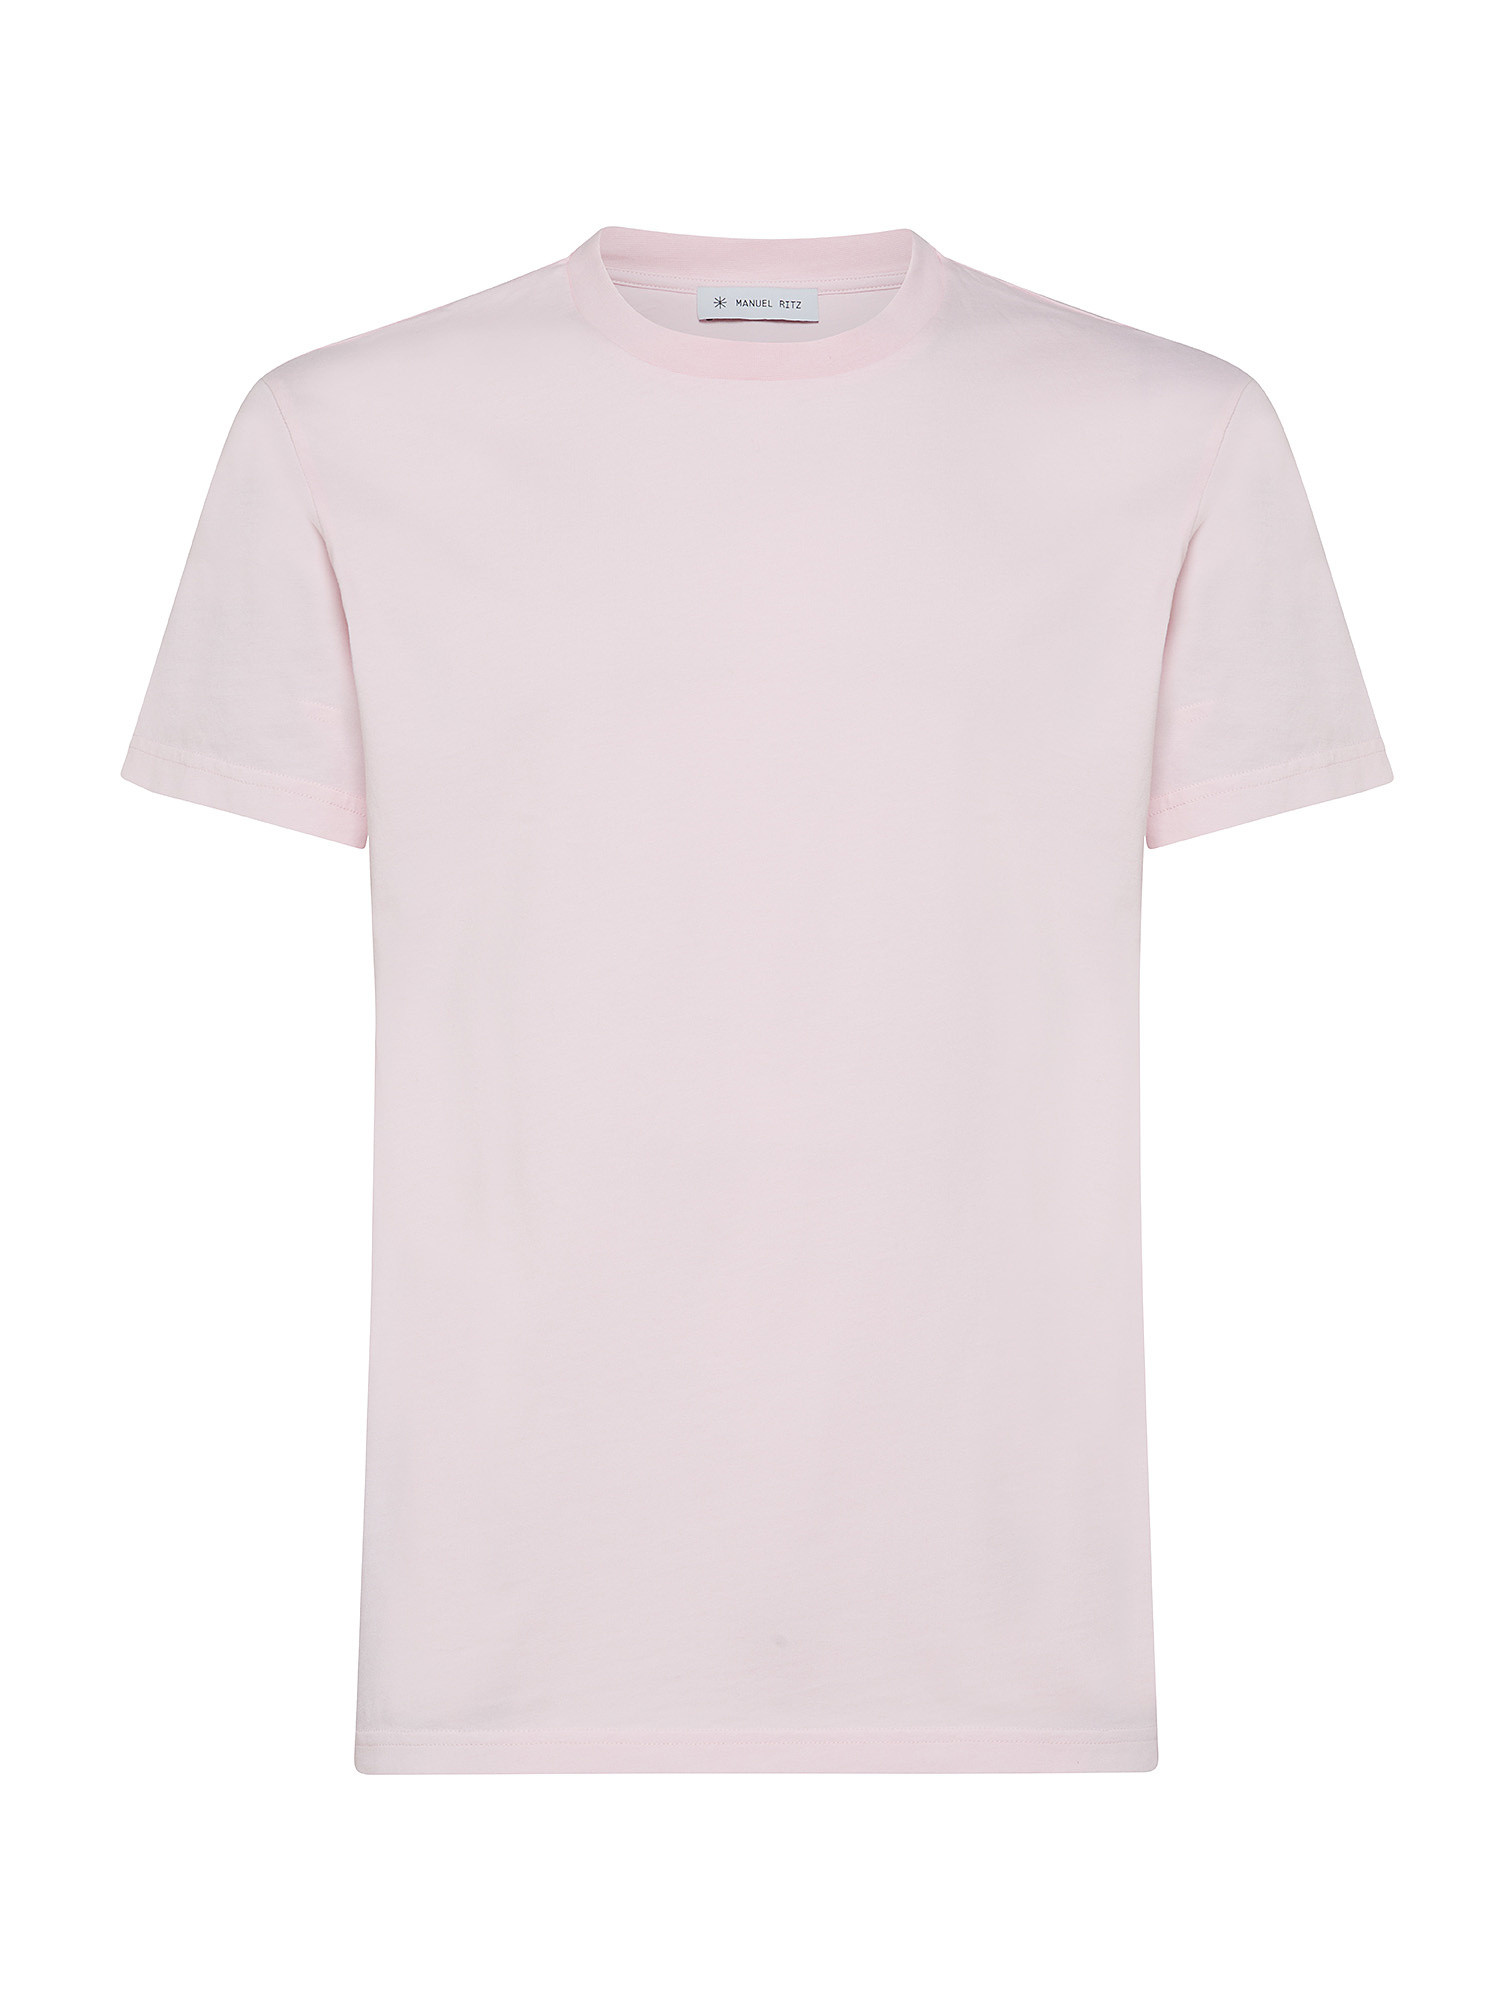 Manuel Ritz - T-shirt in cotone, Rosa, large image number 0